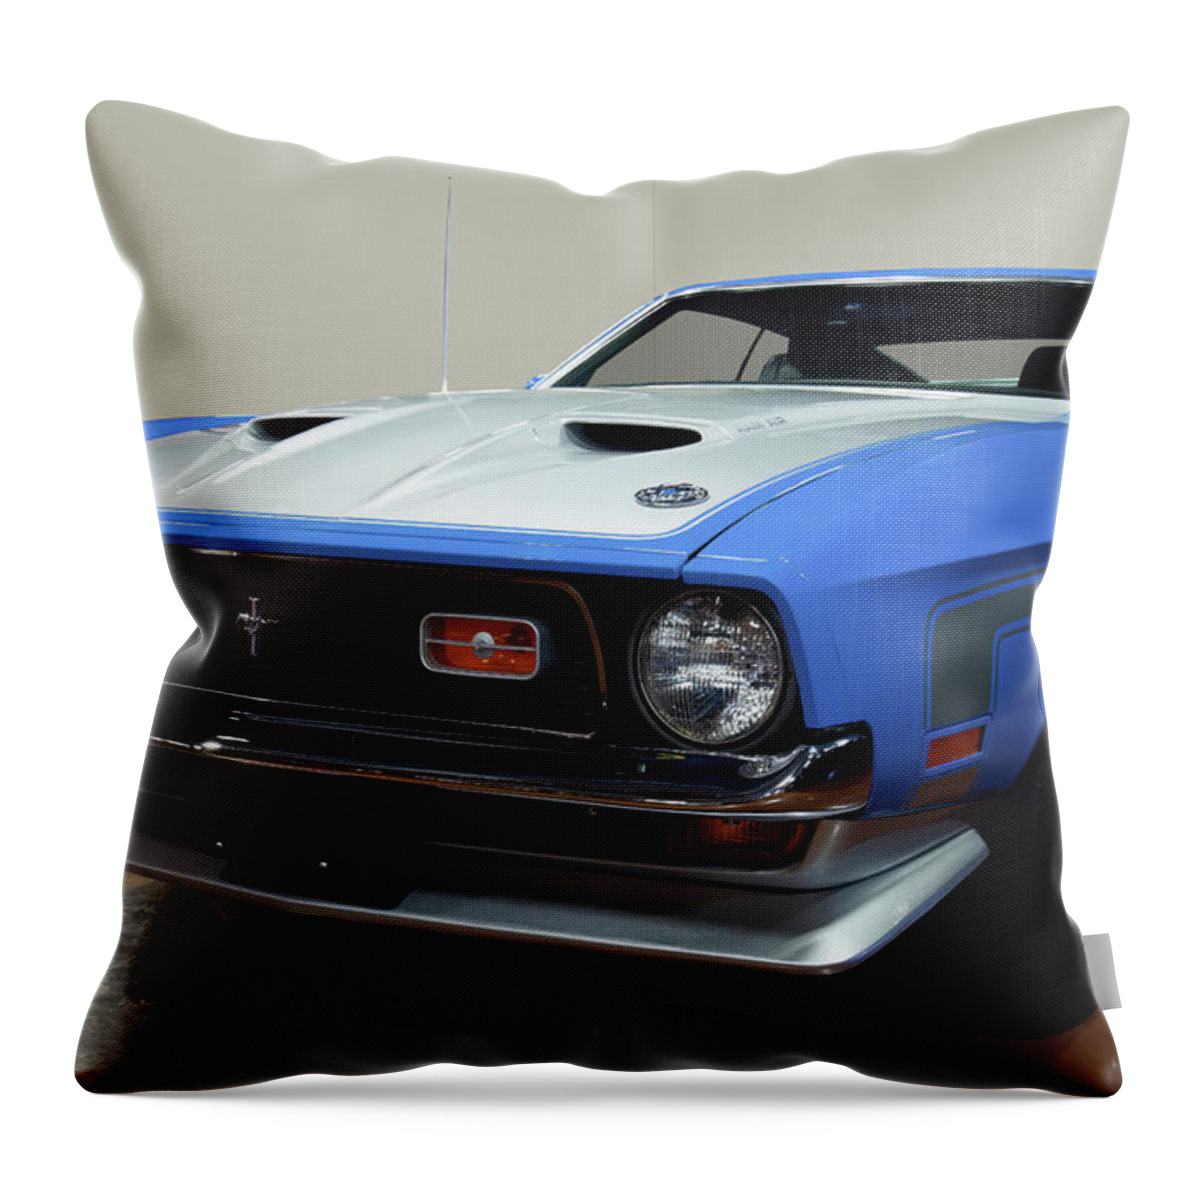 1971 Ford Mustang Fastback Throw Pillow featuring the photograph 1971 Ford Mustang Fastback by Flees Photos